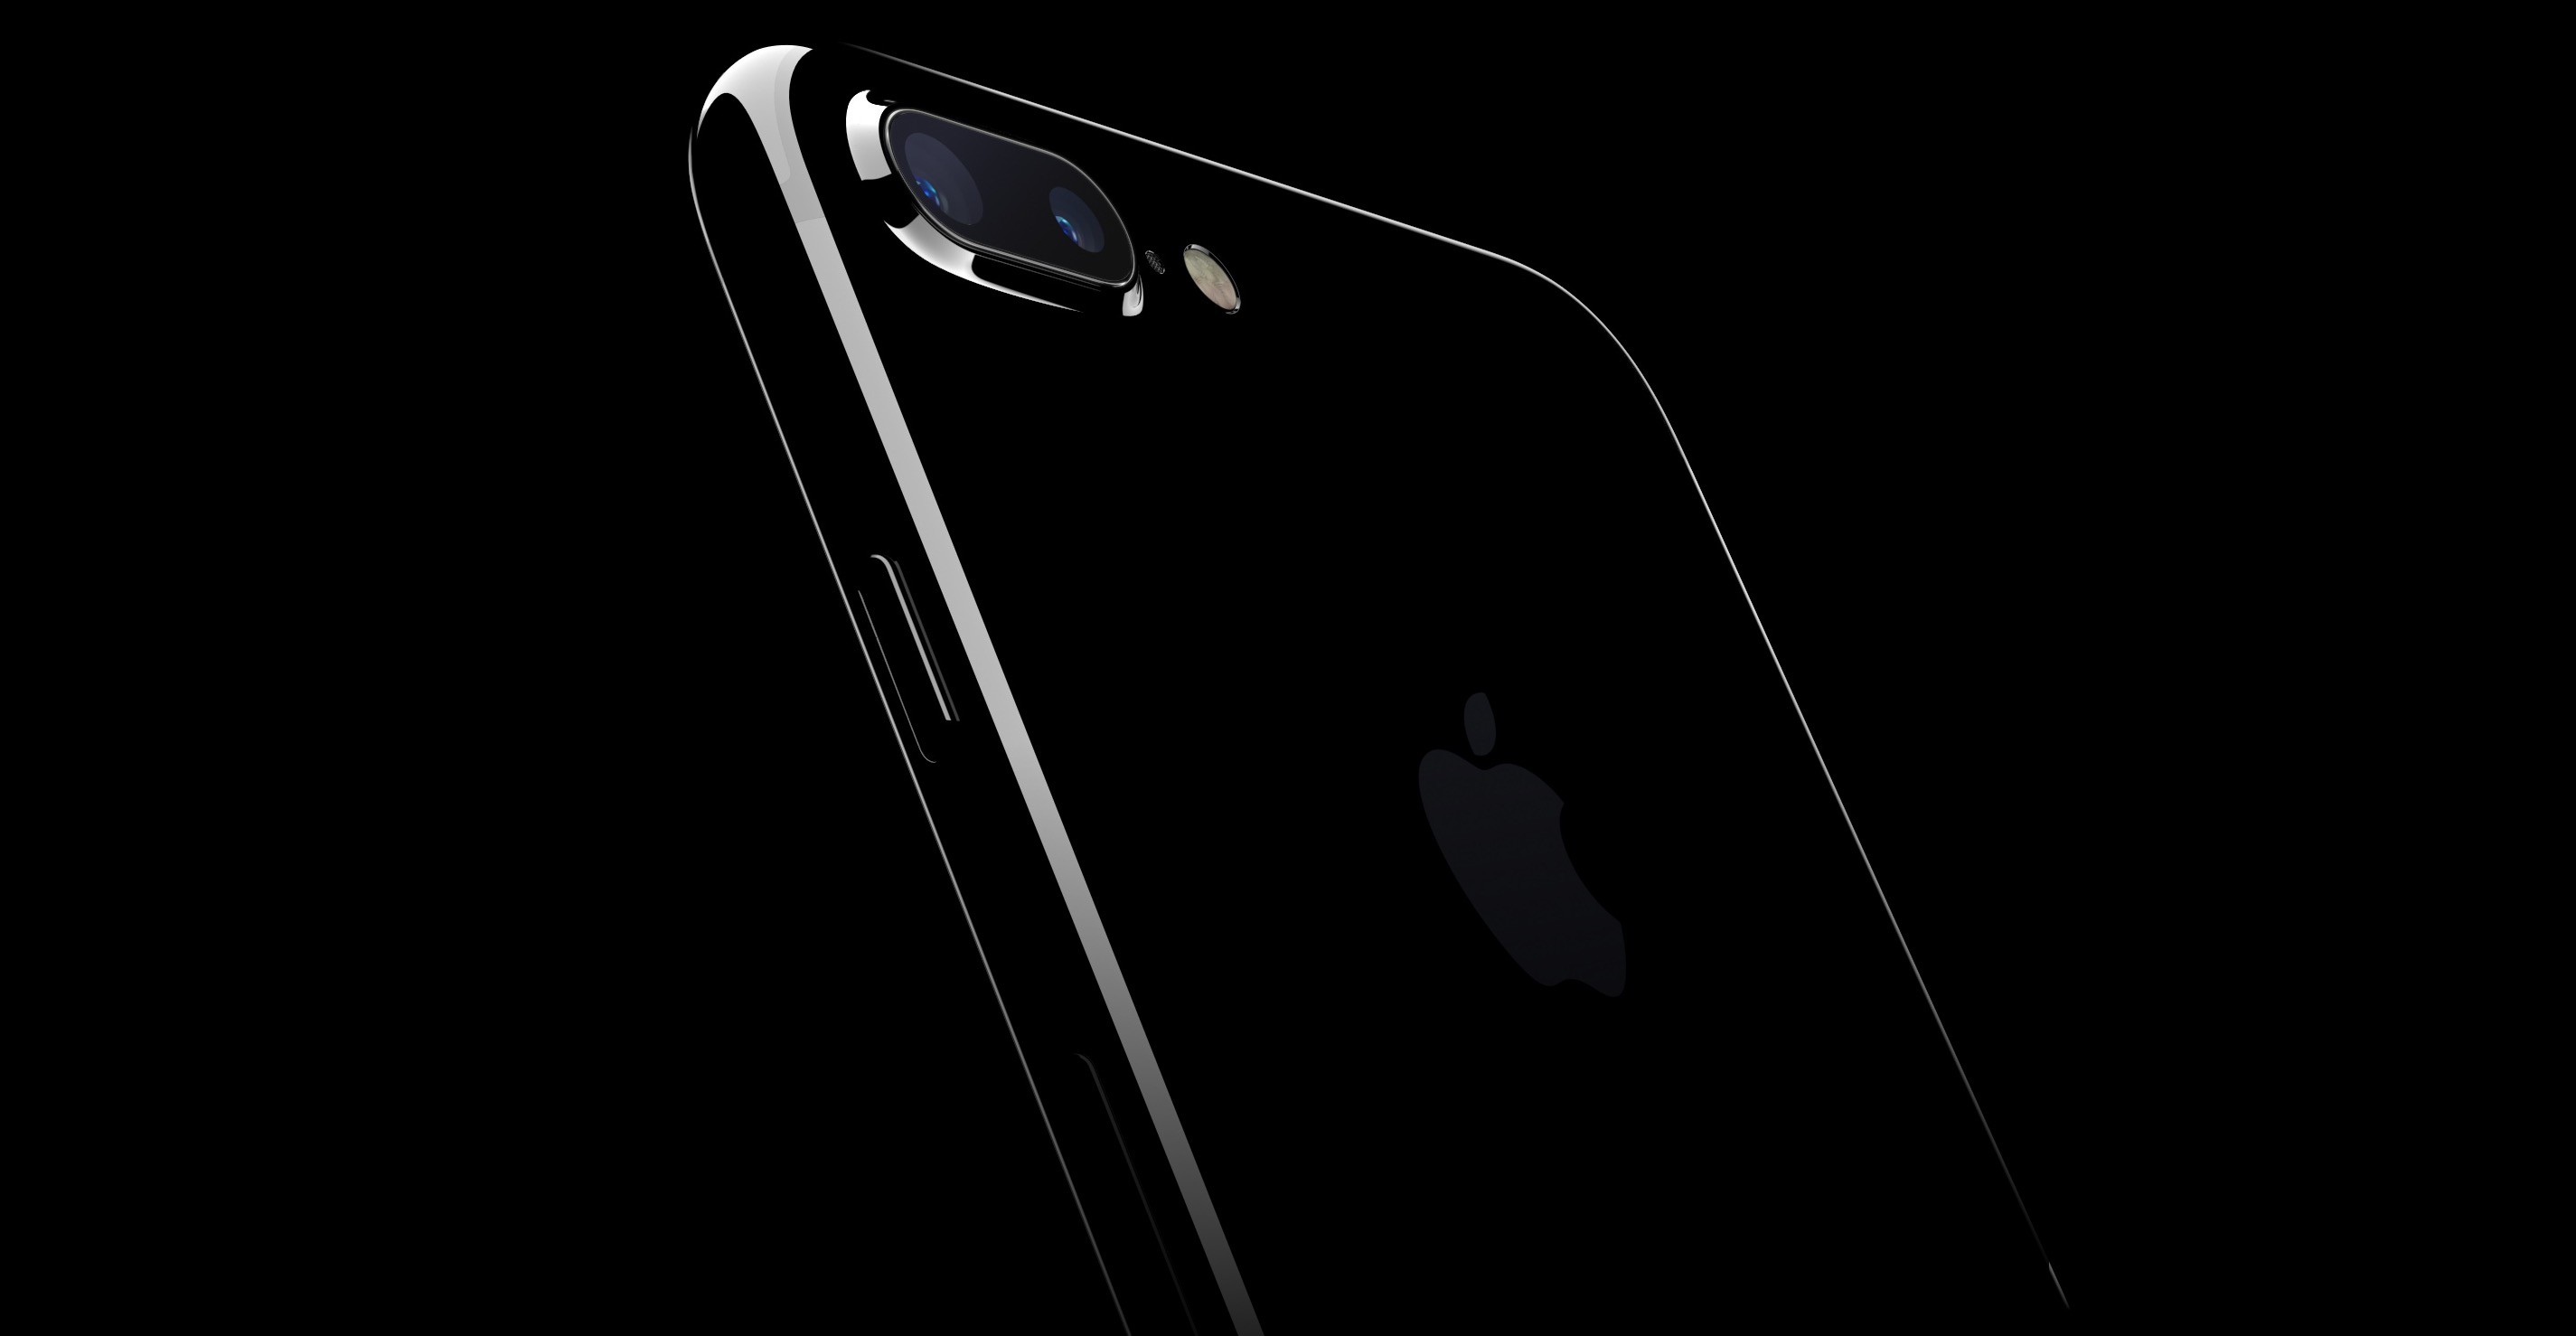 High gloss Jet Black finish is exclusively available in 128GB and 256GB iPhone 7 models